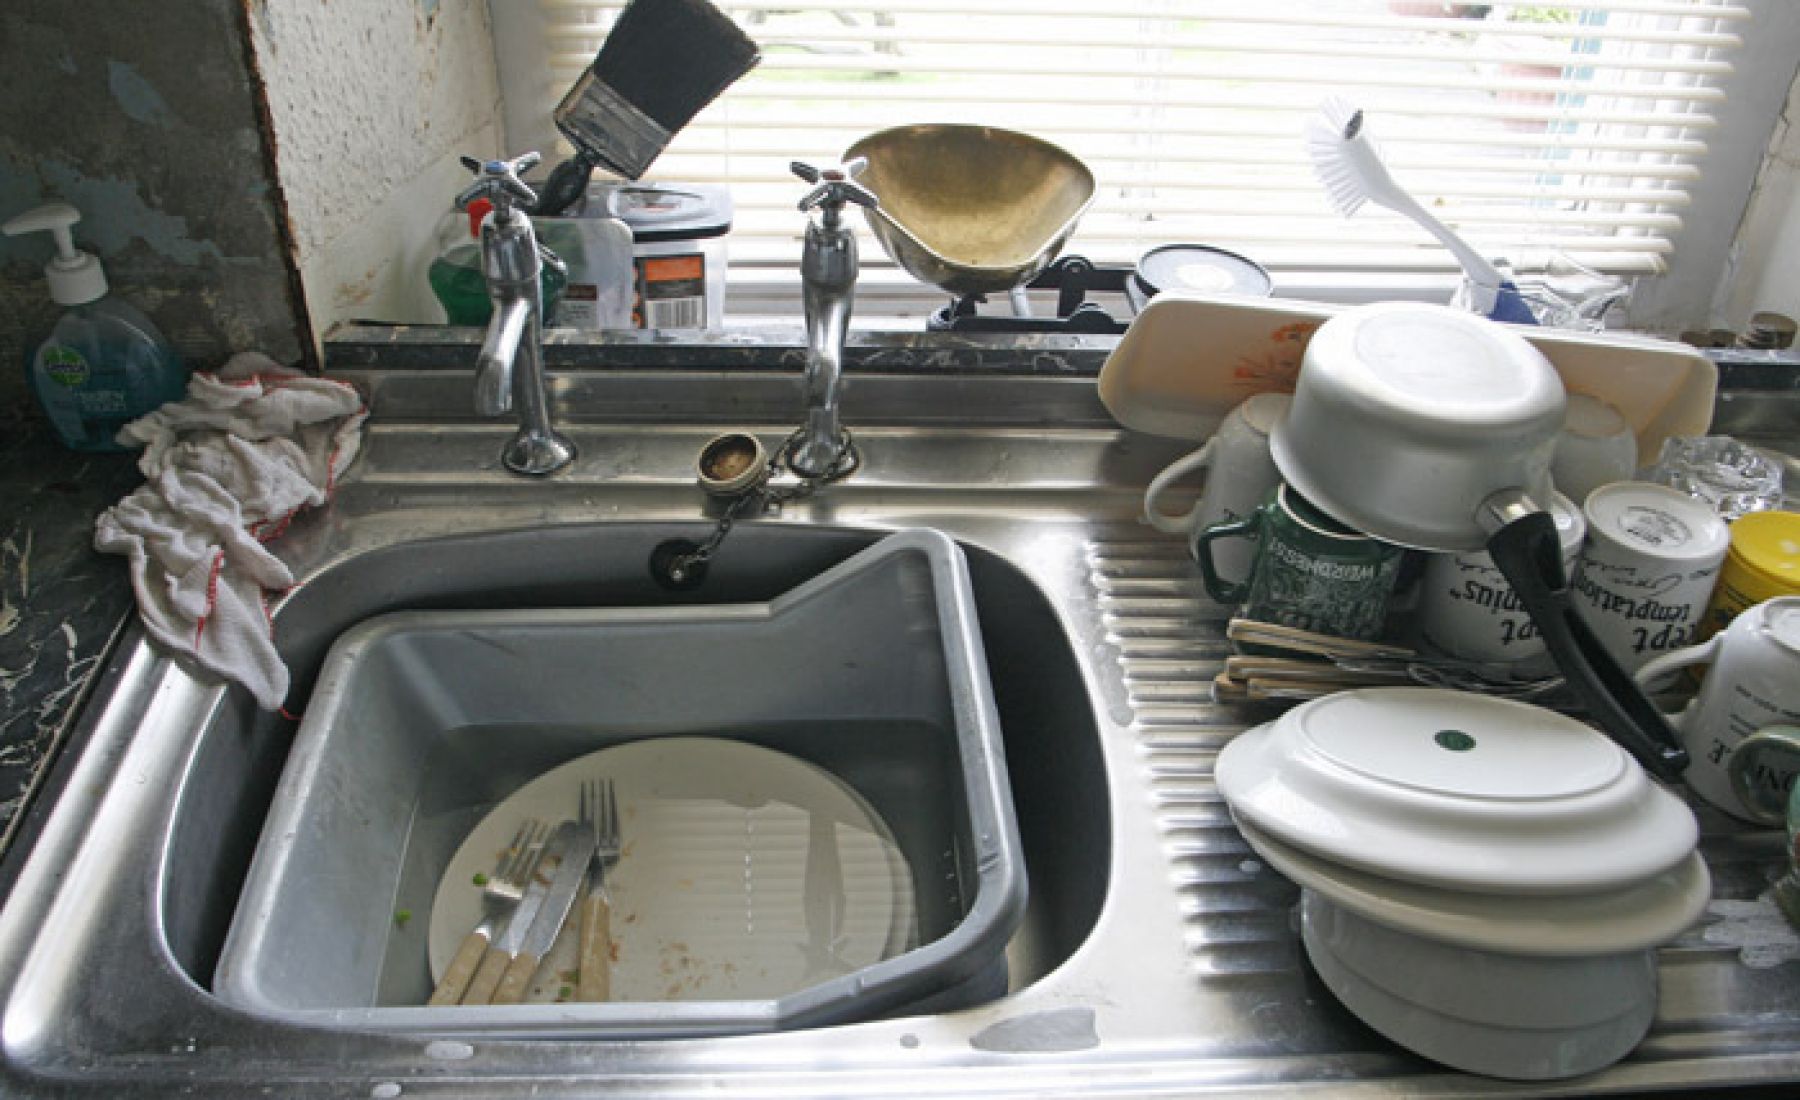 kitchen sink and bathroom sink backed up